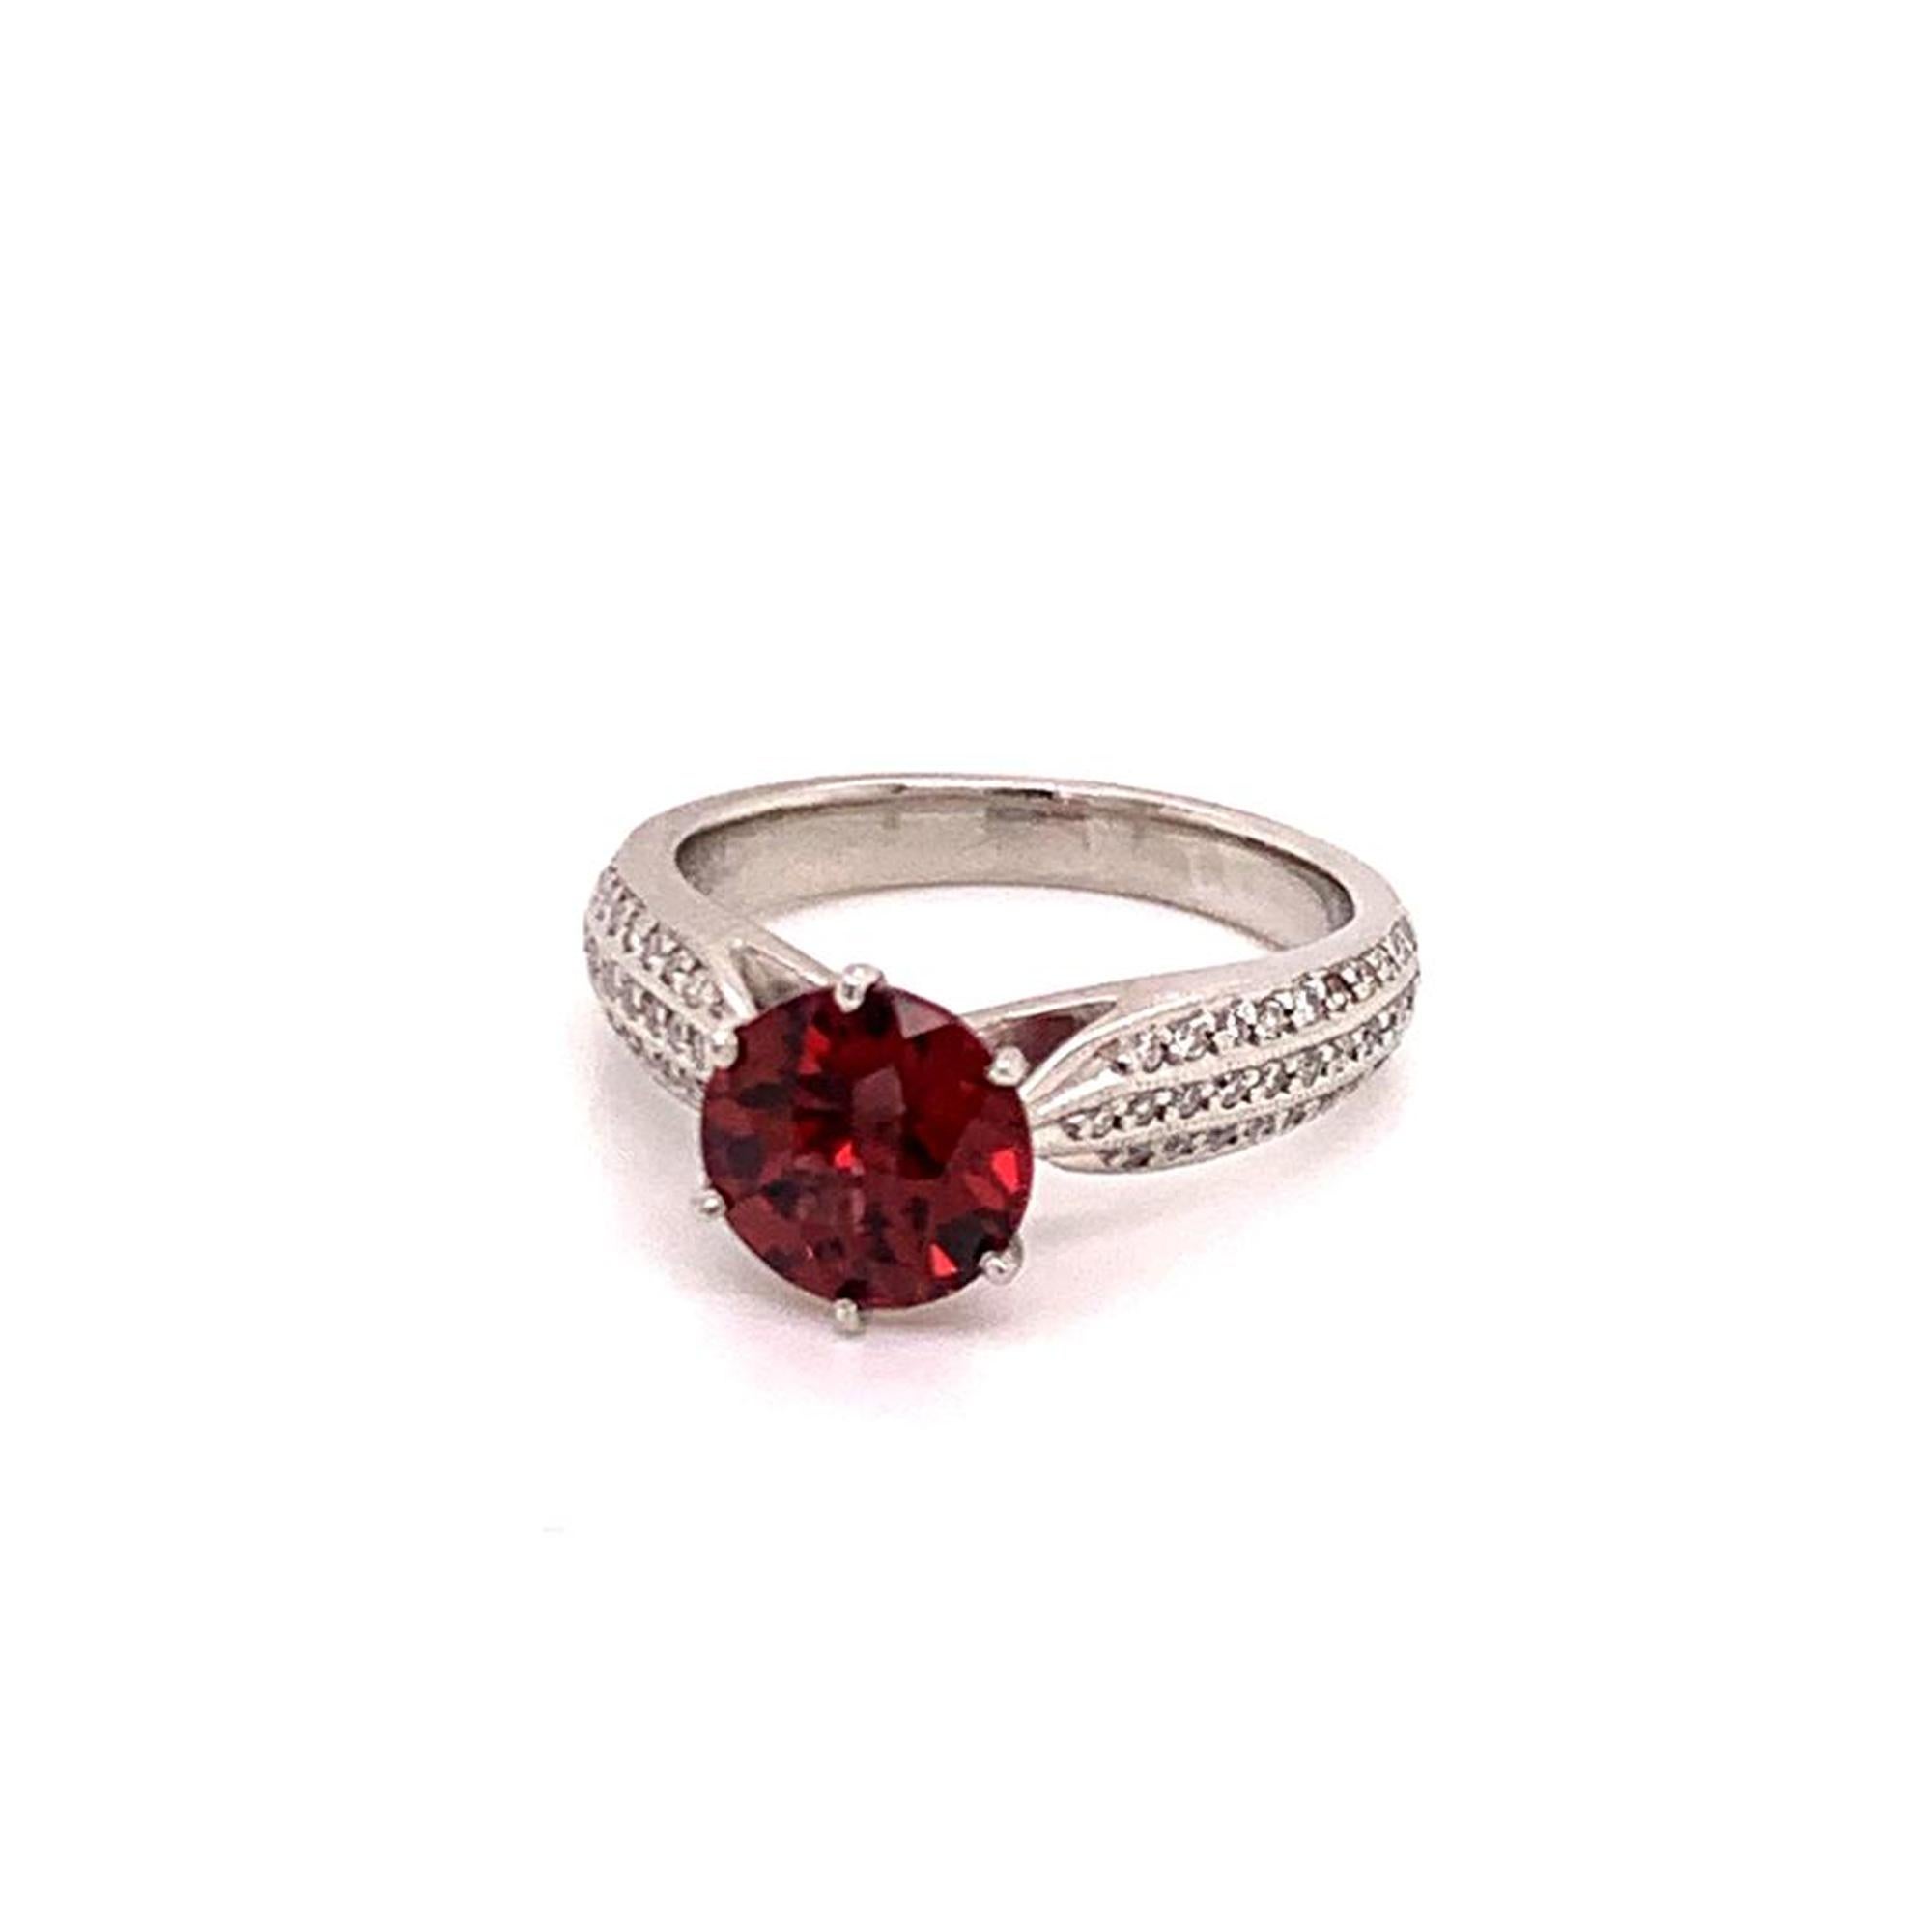 Diamond Platinum Tourmaline Rubellite Ring 5.75 2.43 TCW Certified In New Condition For Sale In Brooklyn, NY